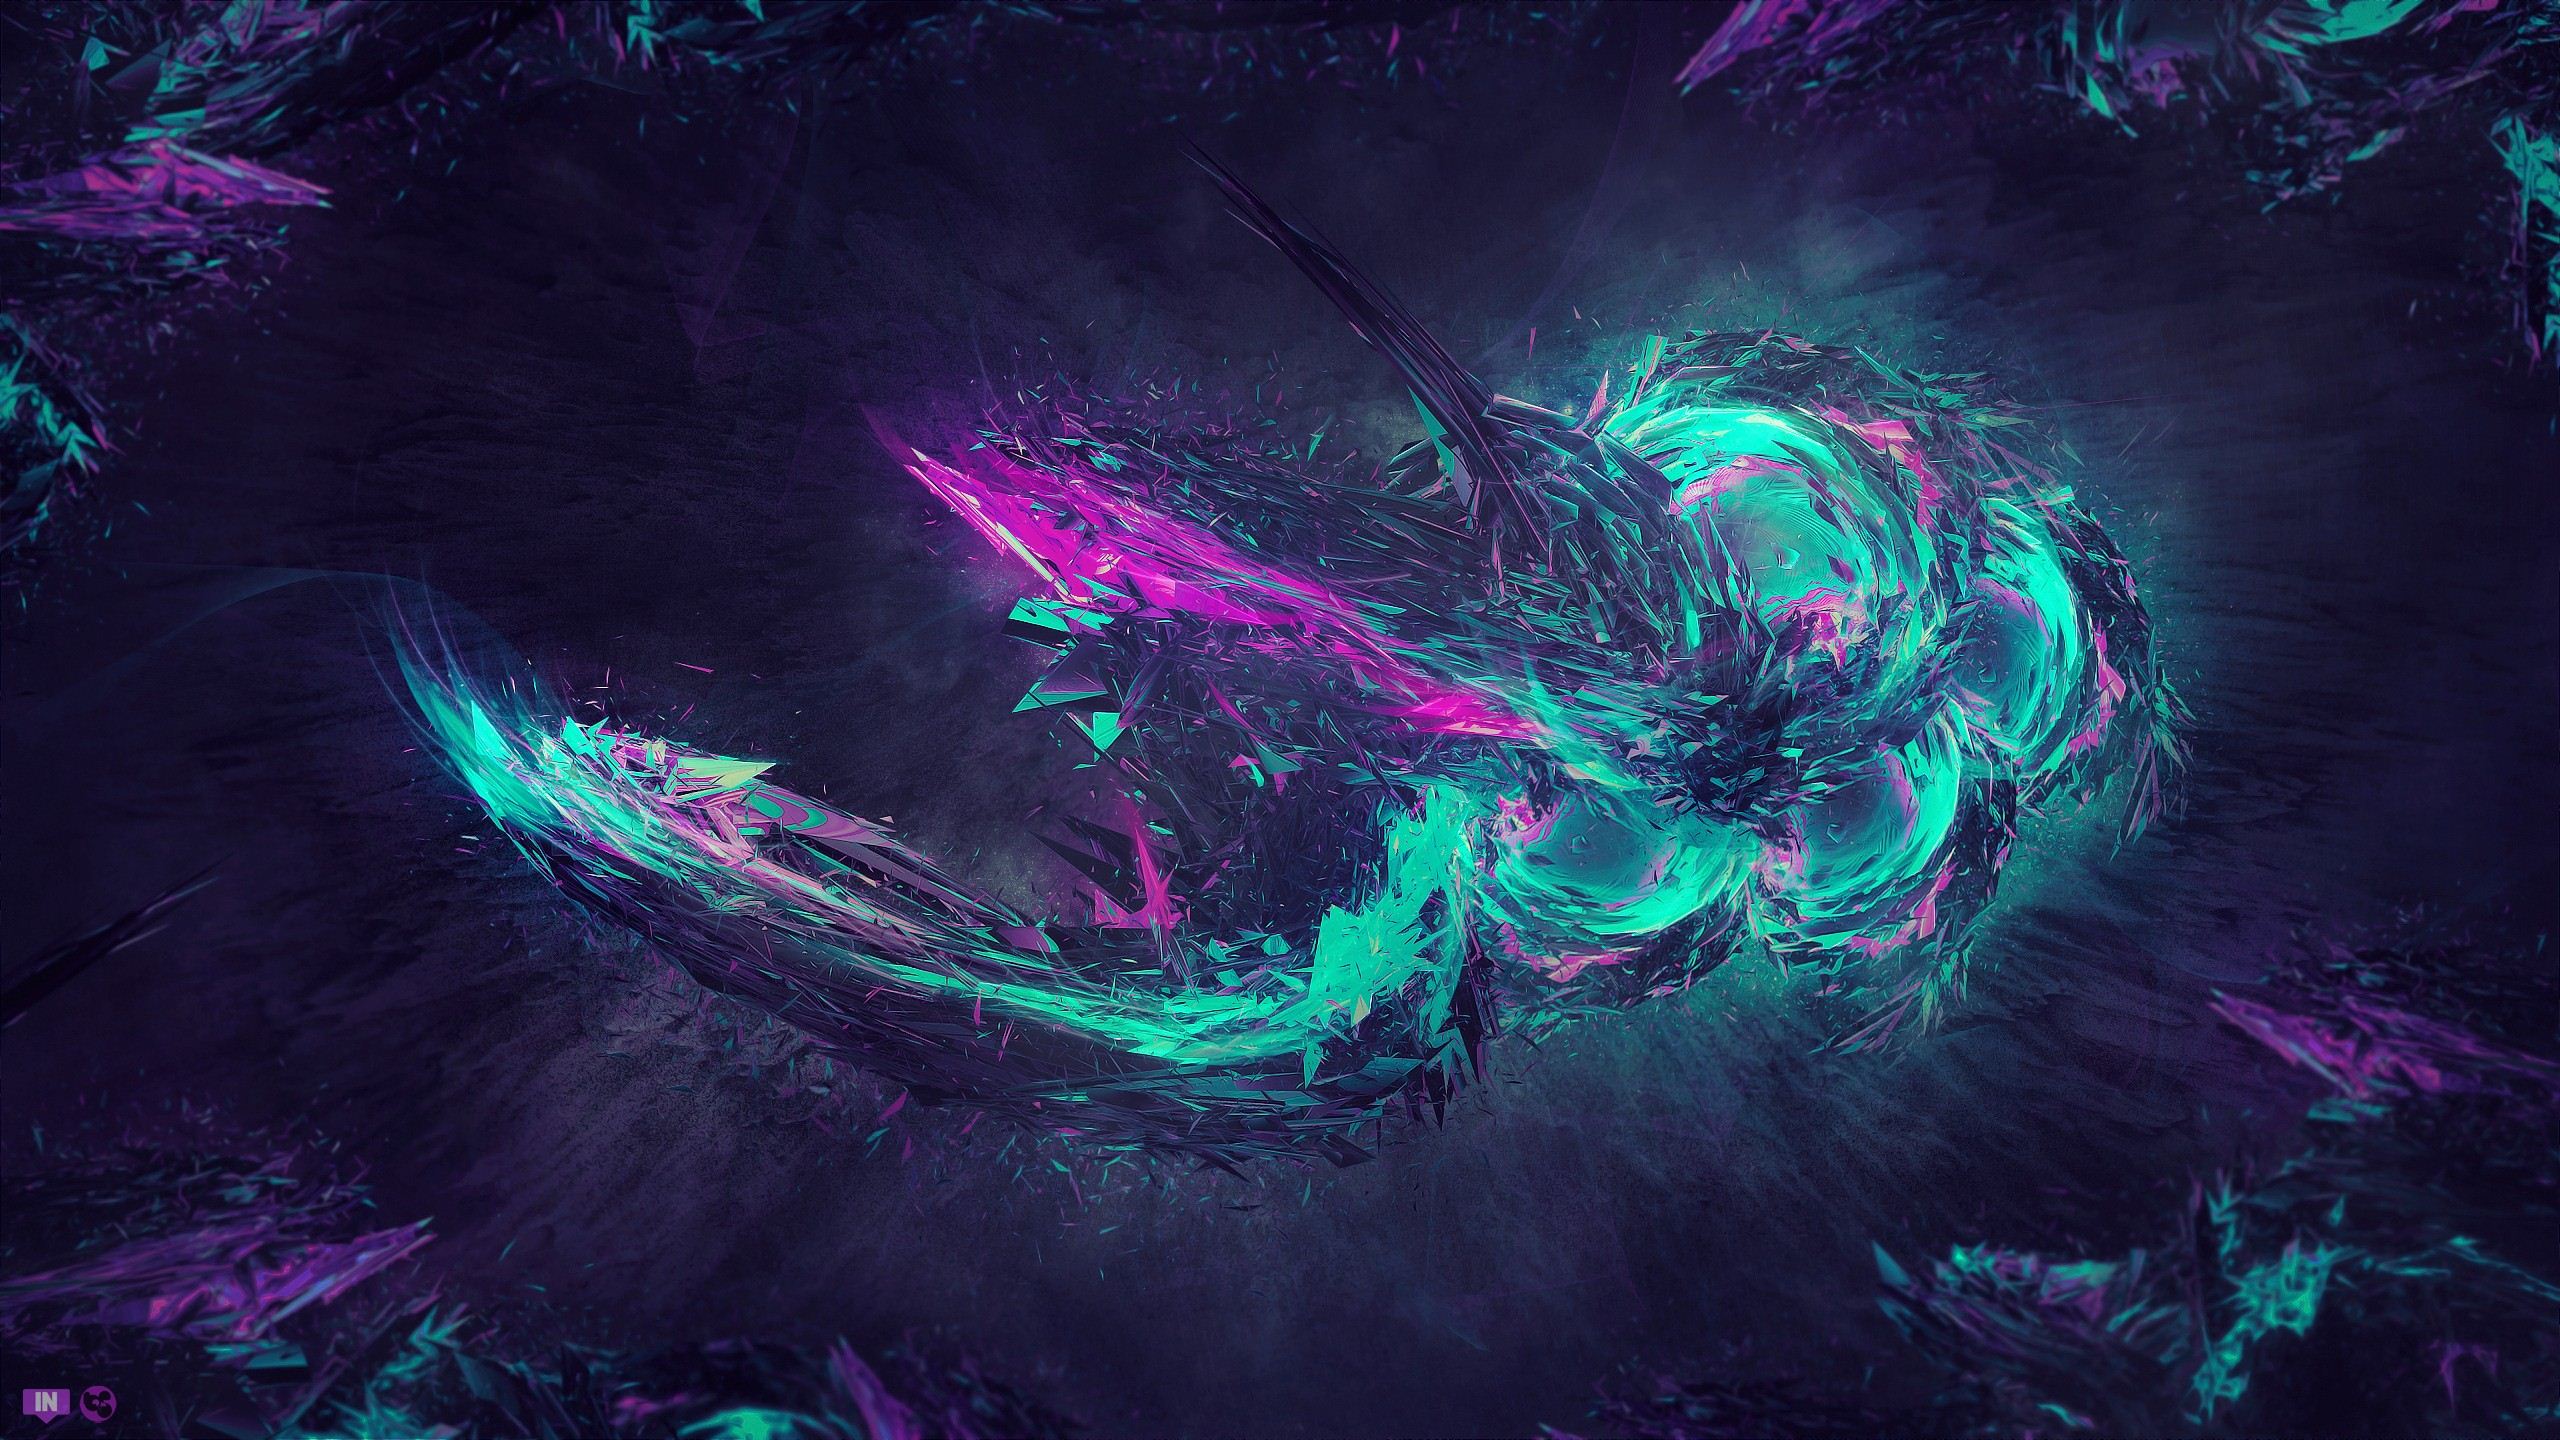 Purple and Teal Effects   Desktop Backgrounds